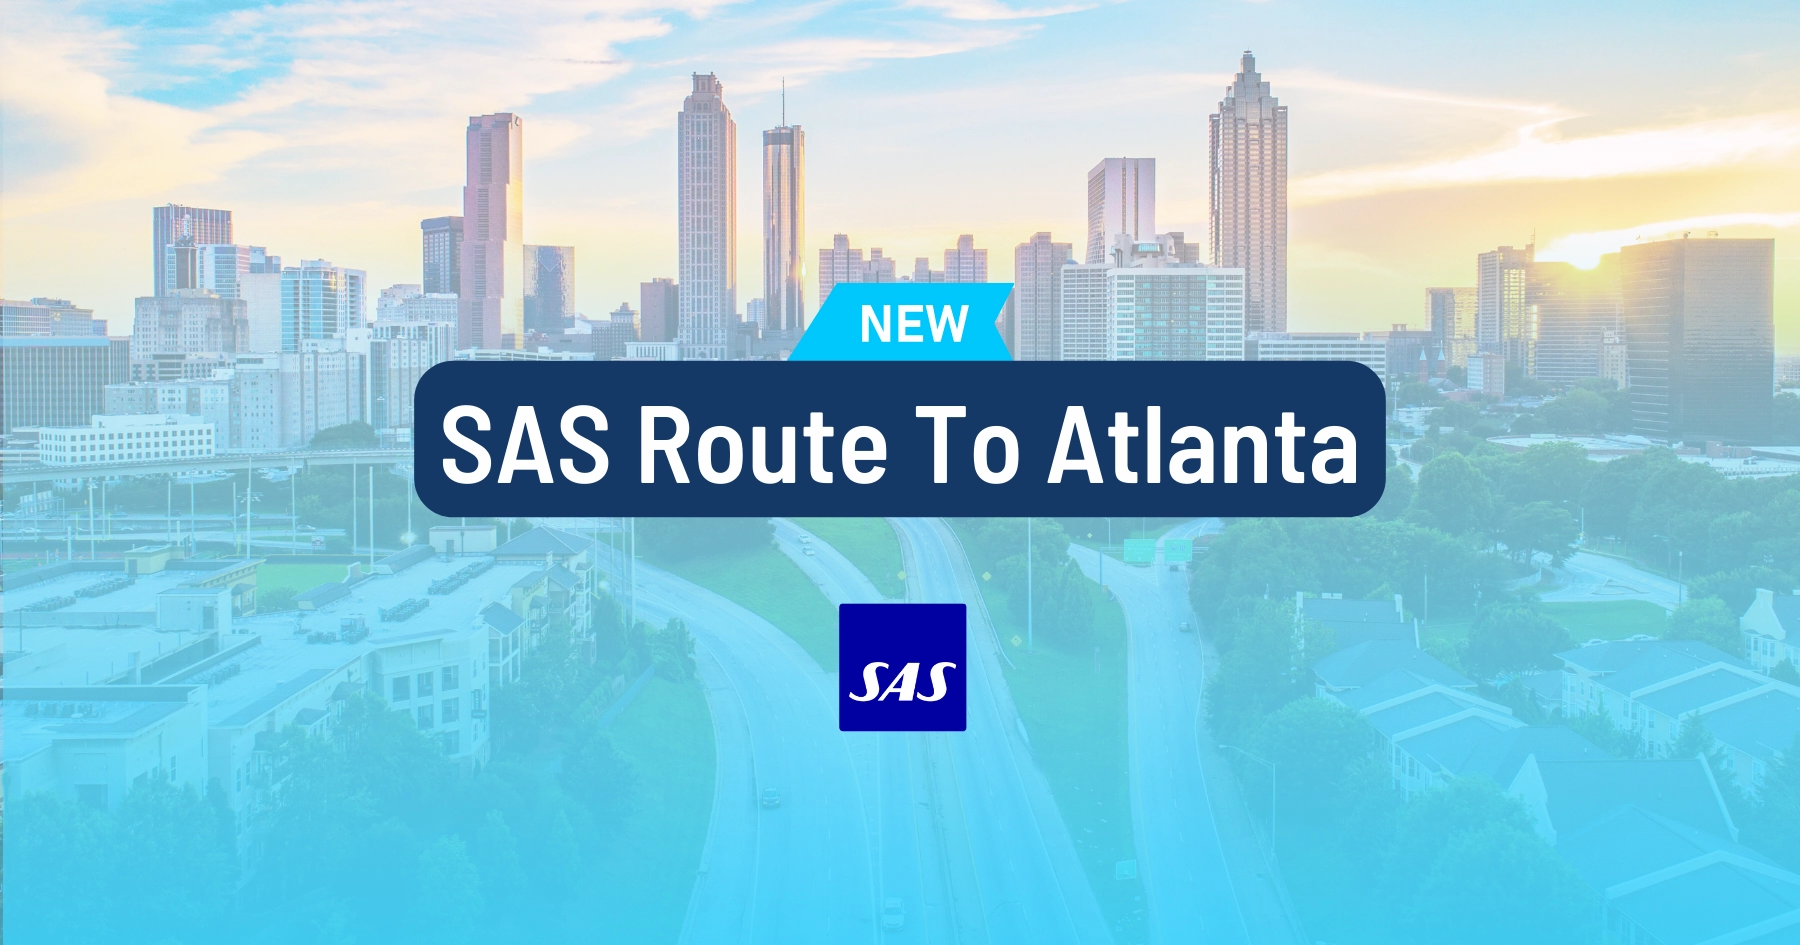 SAS Opens New Route To Atlanta And Cooperation With Delta.